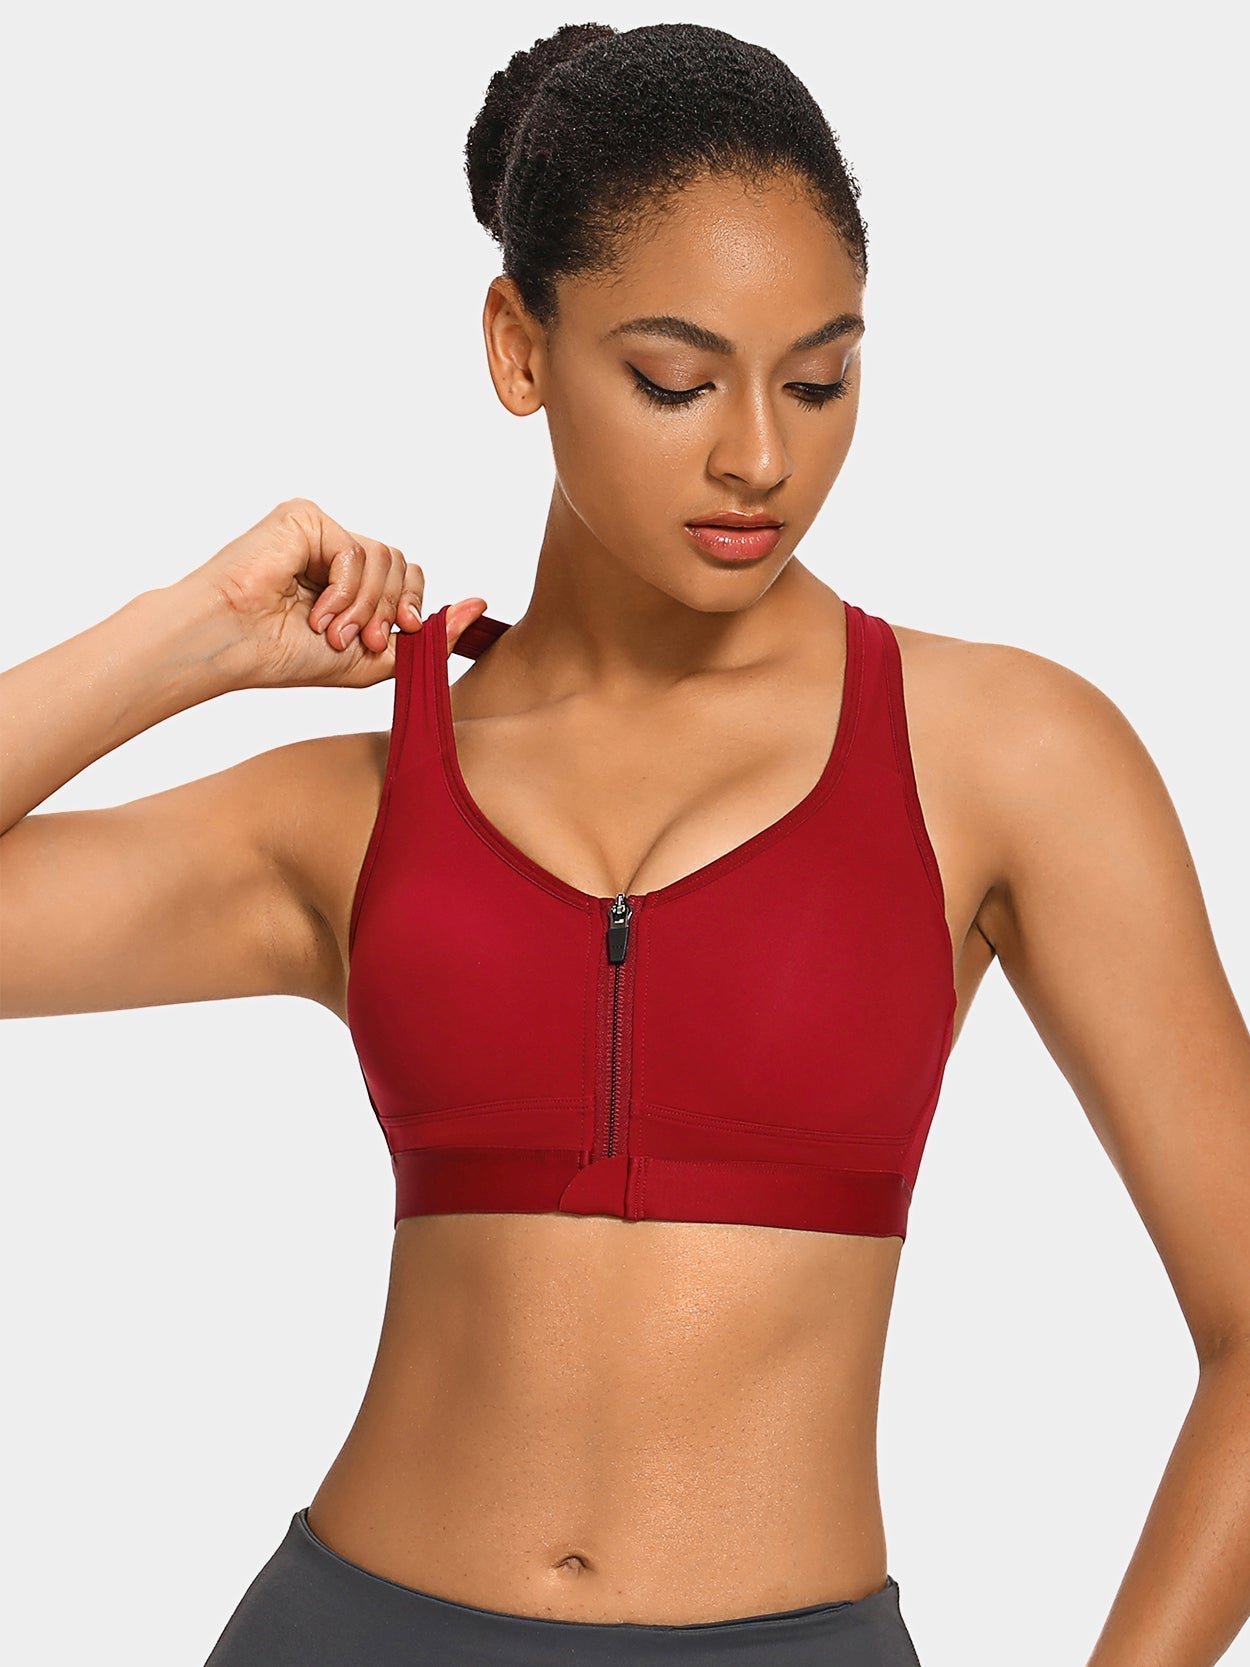 TOWED22 Plus Size Bras,Womens High Impact Convertible Racerback Sports Bra  - Padded Wirefree Workout Sports Bra Red,38D 